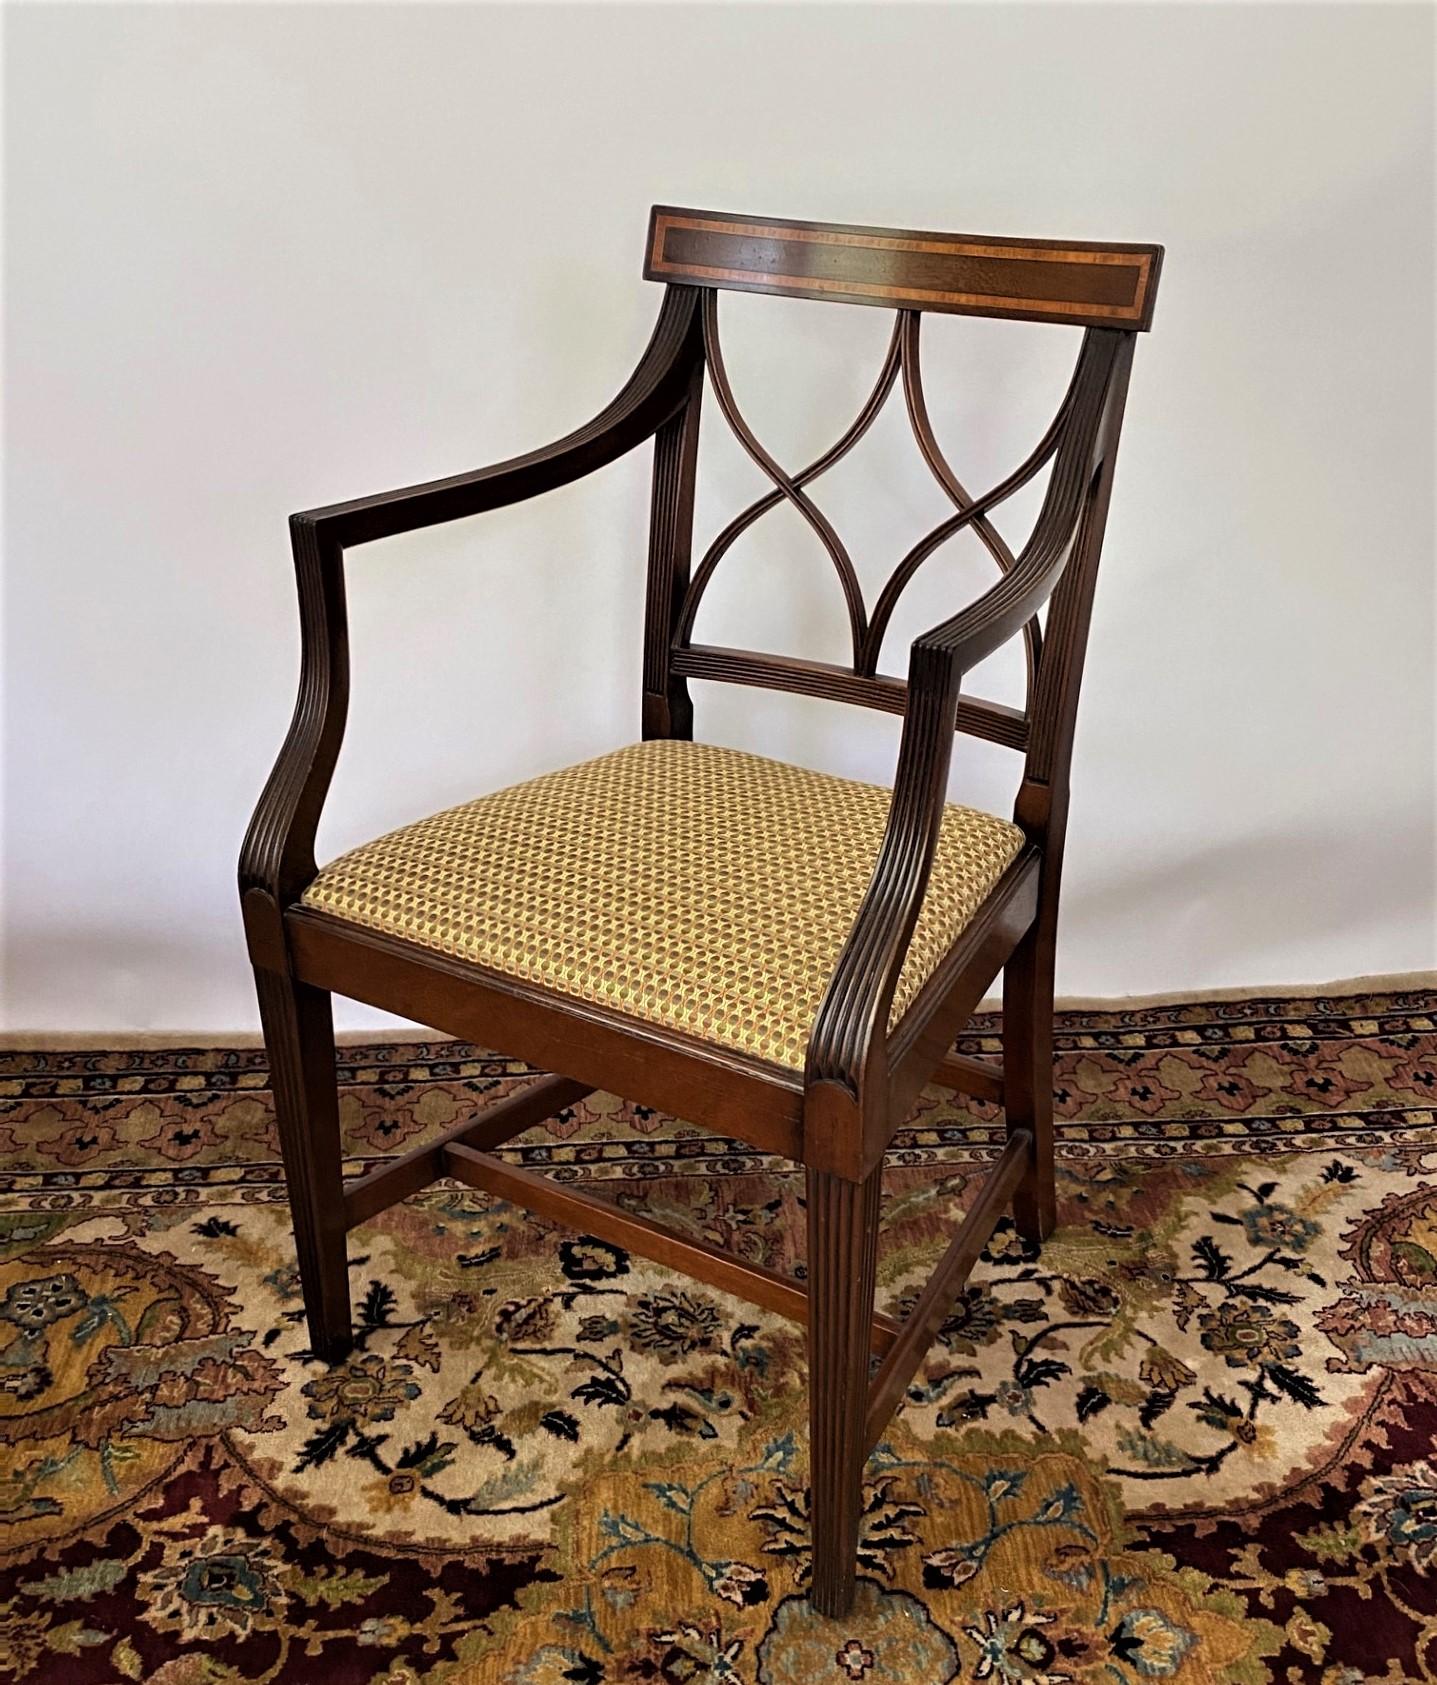 Very handsome English-made Sheraton style Mahogany armchair with Tulipwood inlay back panel, stylish grooved double 